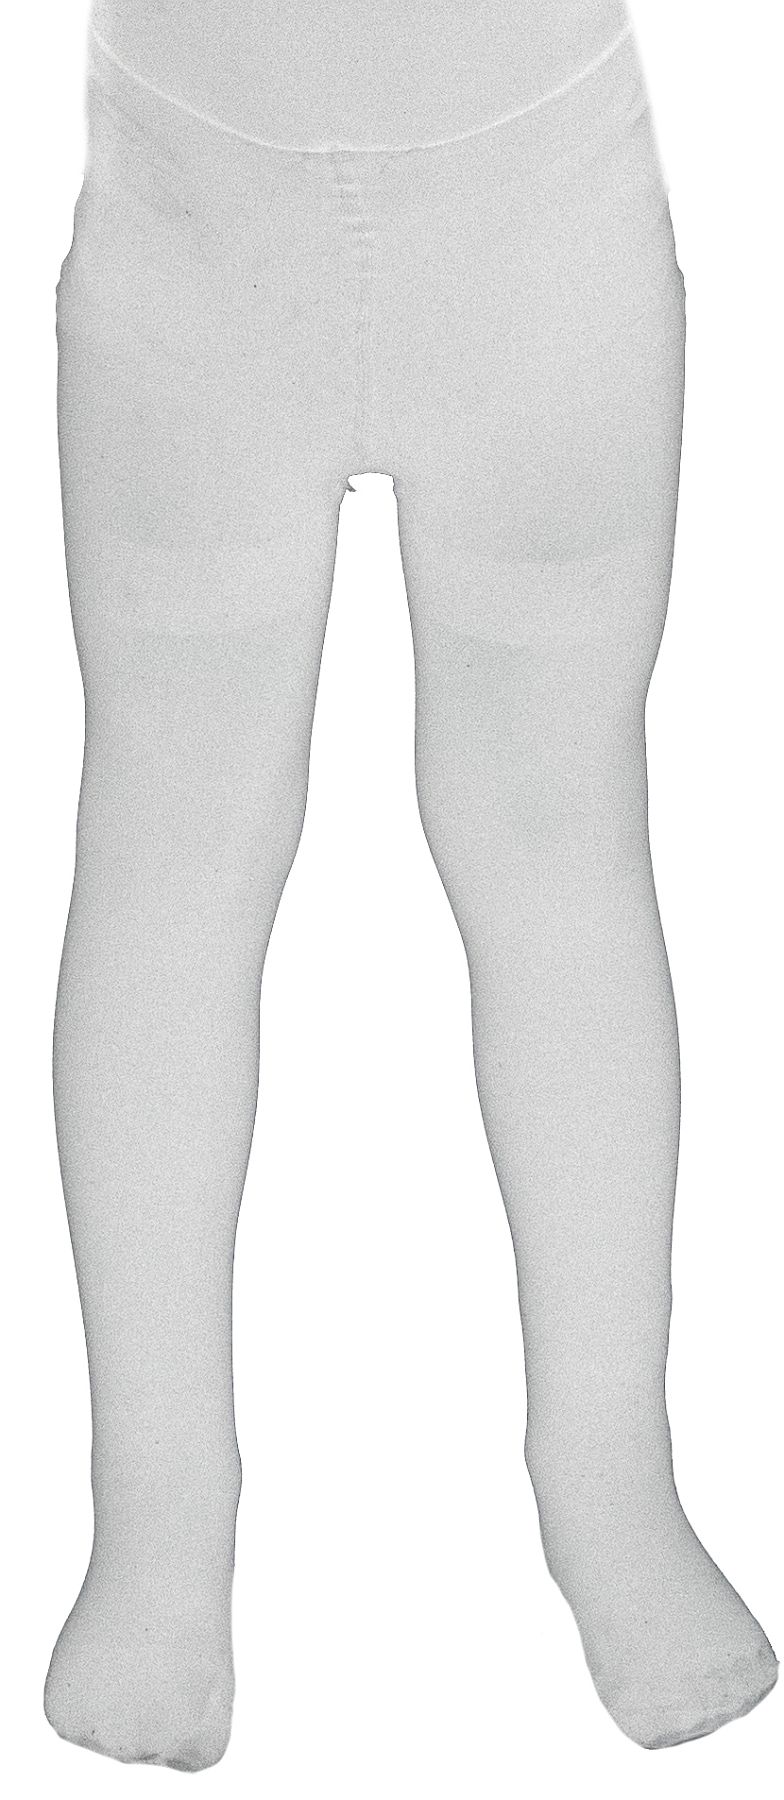 Opaque tights, white